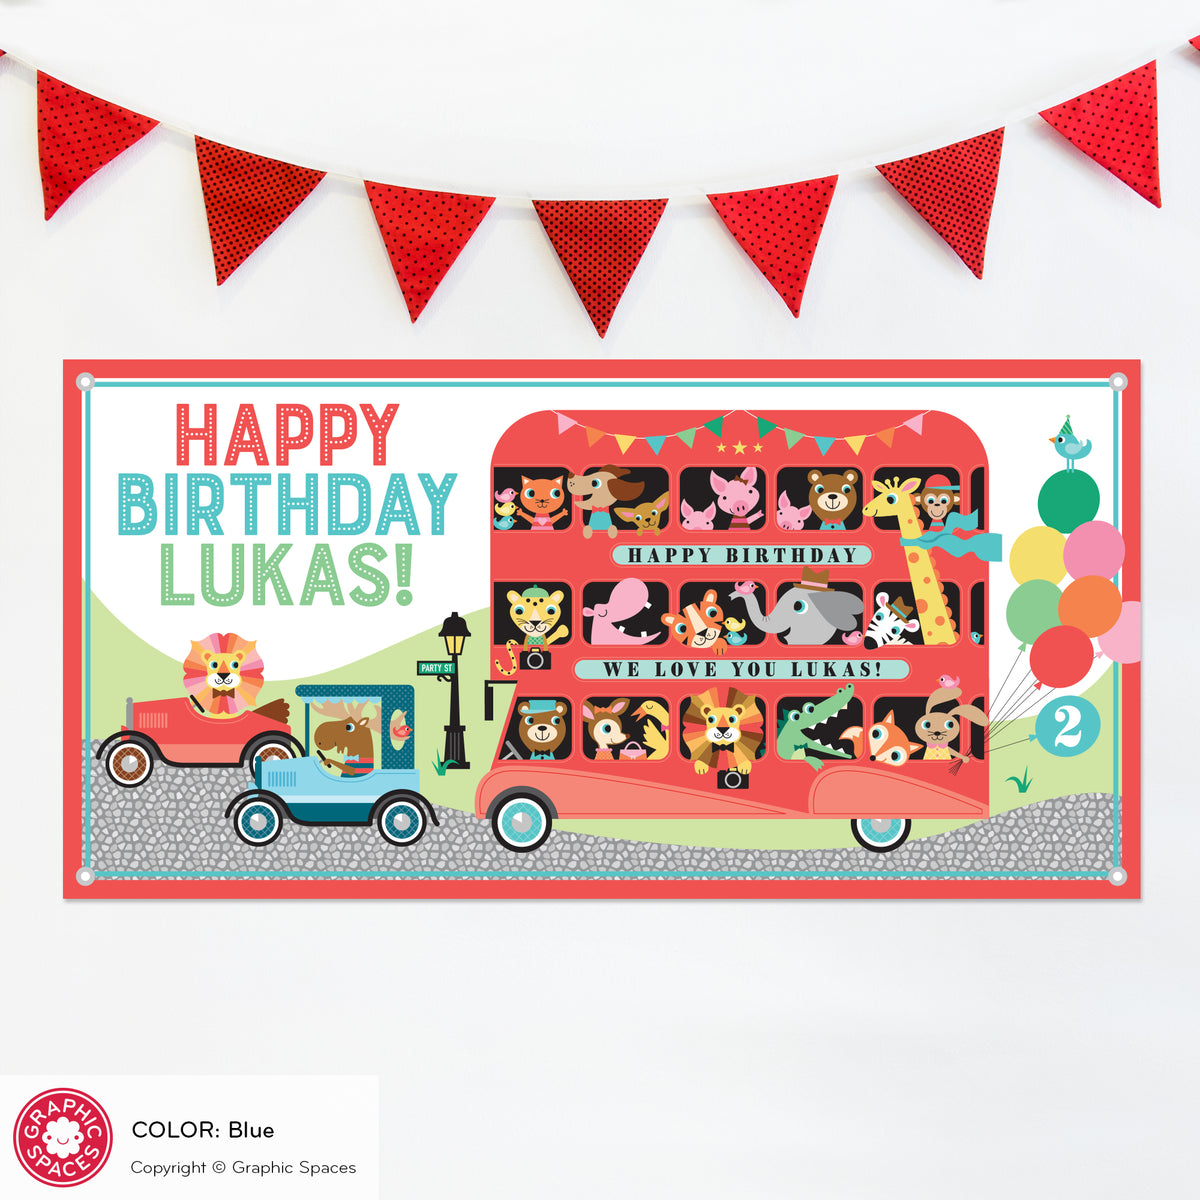 Animal Zoo London Bus Birthday Party Banner - BLUE